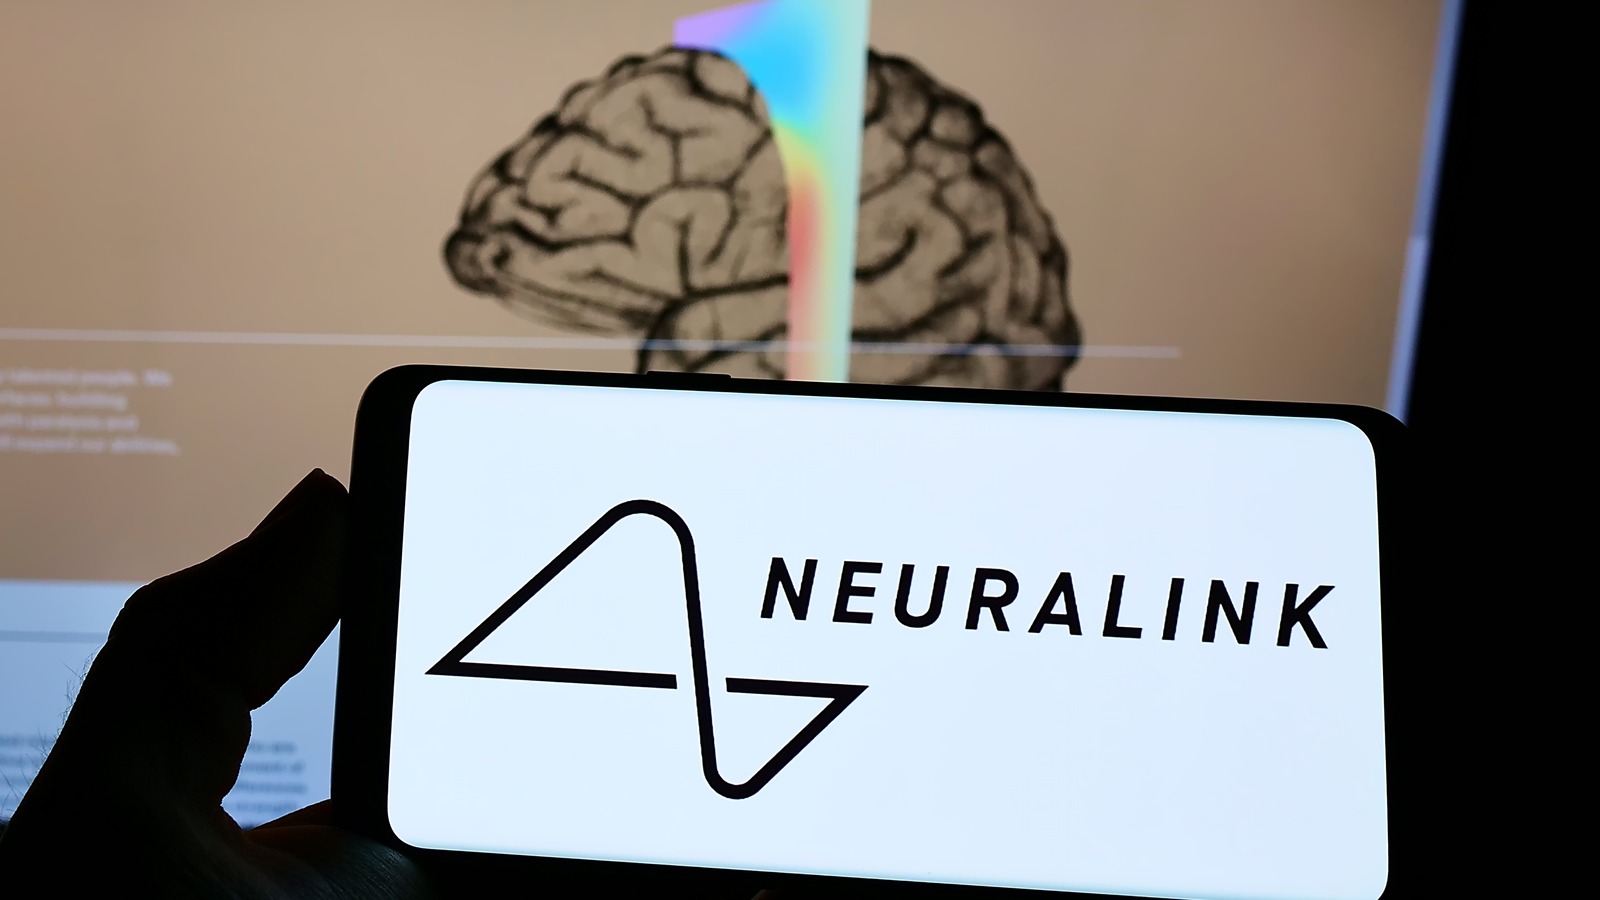 At Least 8 Monkeys Died During A Neuralink Experiment